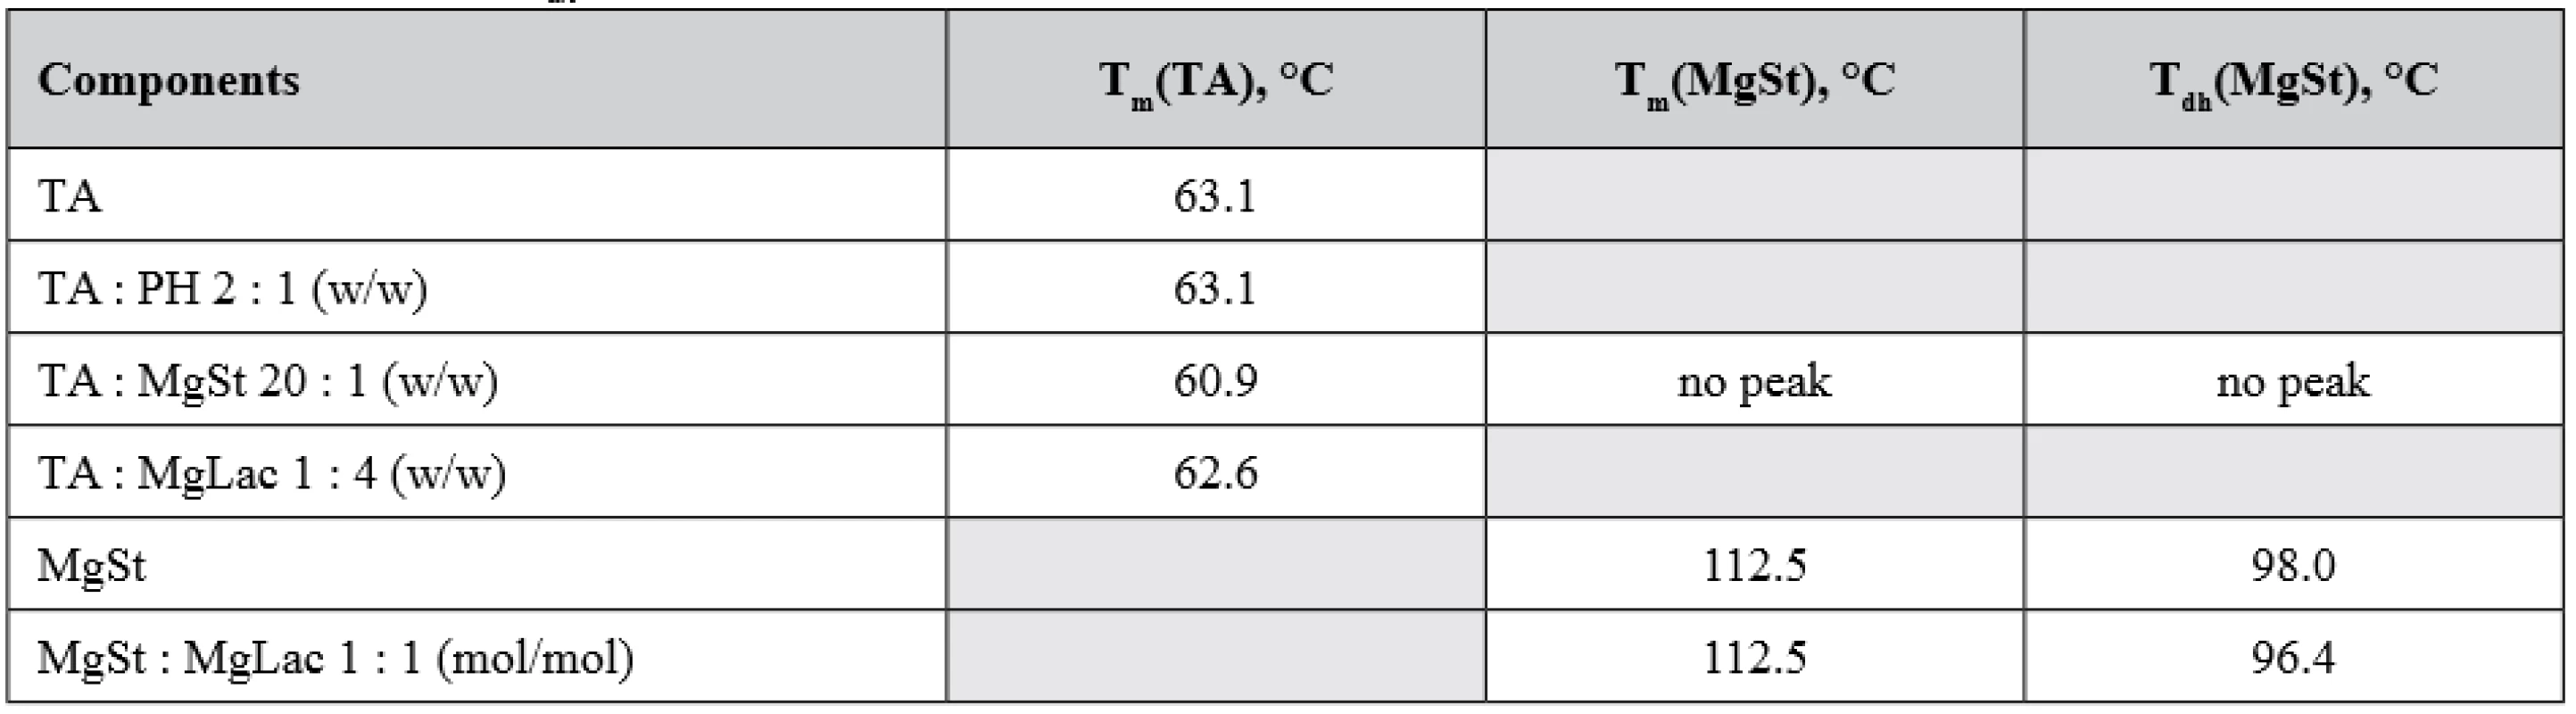 The maxima of calorimetric peaks of the individual components and their mixtures : melting temperatures (Tm) and dehydration temperature (Tdh) of the corresponding substances 